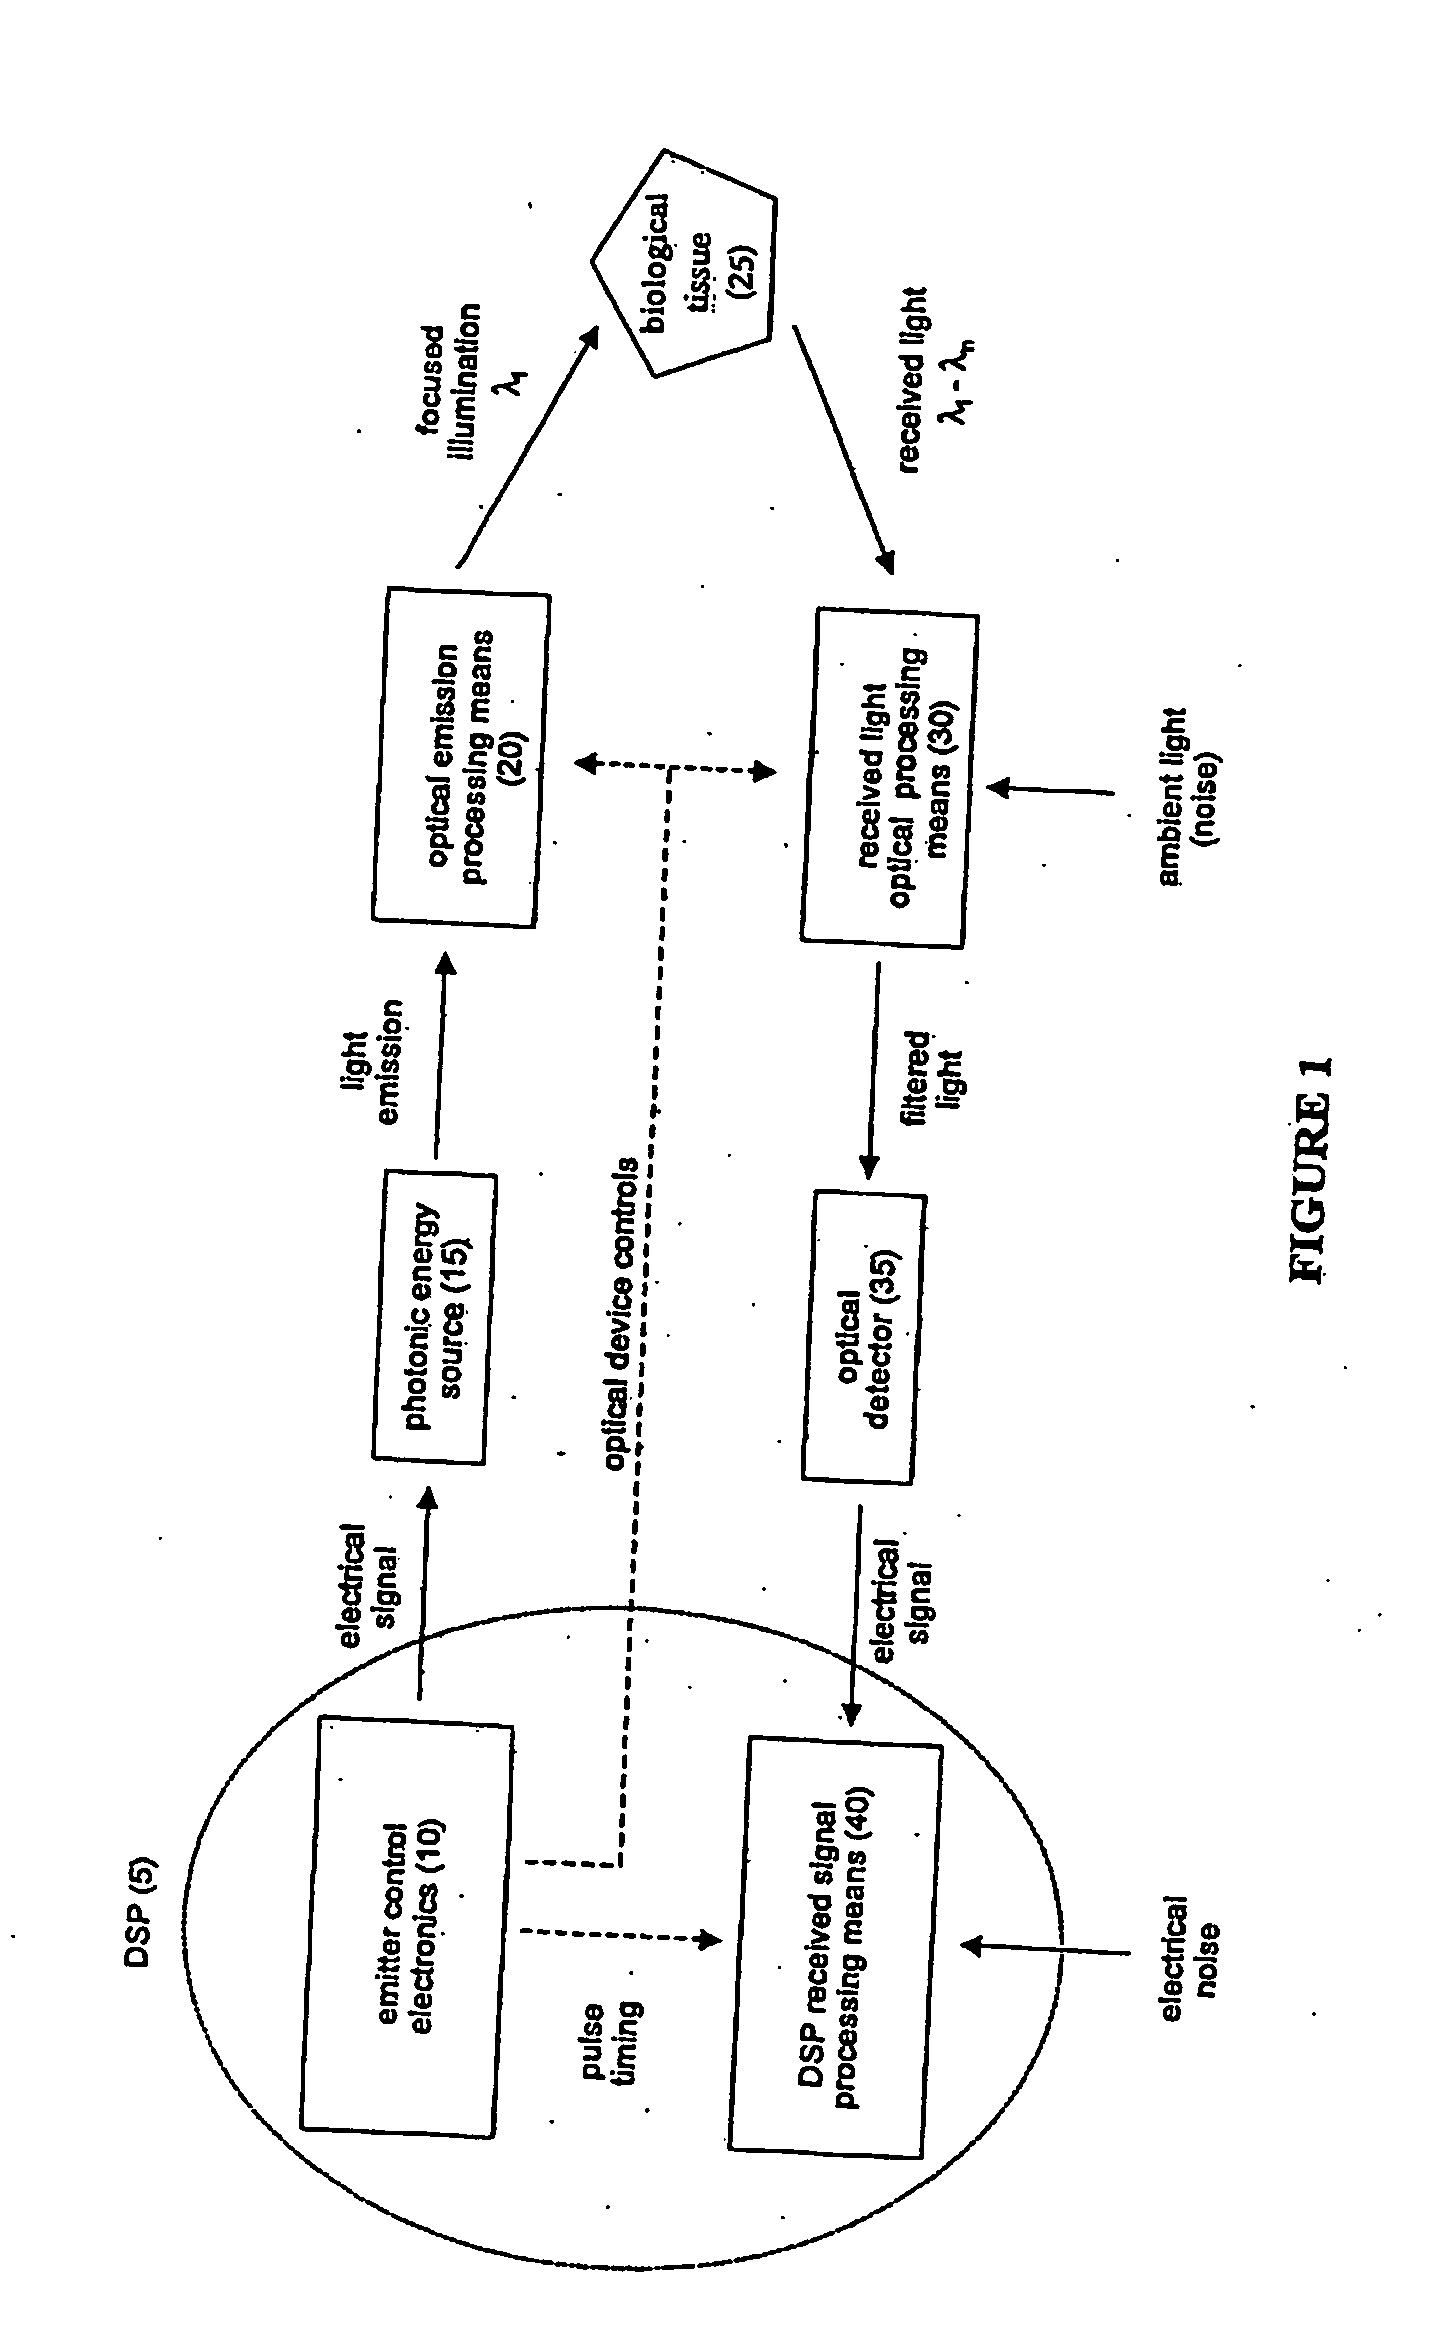 Optical system and use thereof for detecting patterns in biological tissue